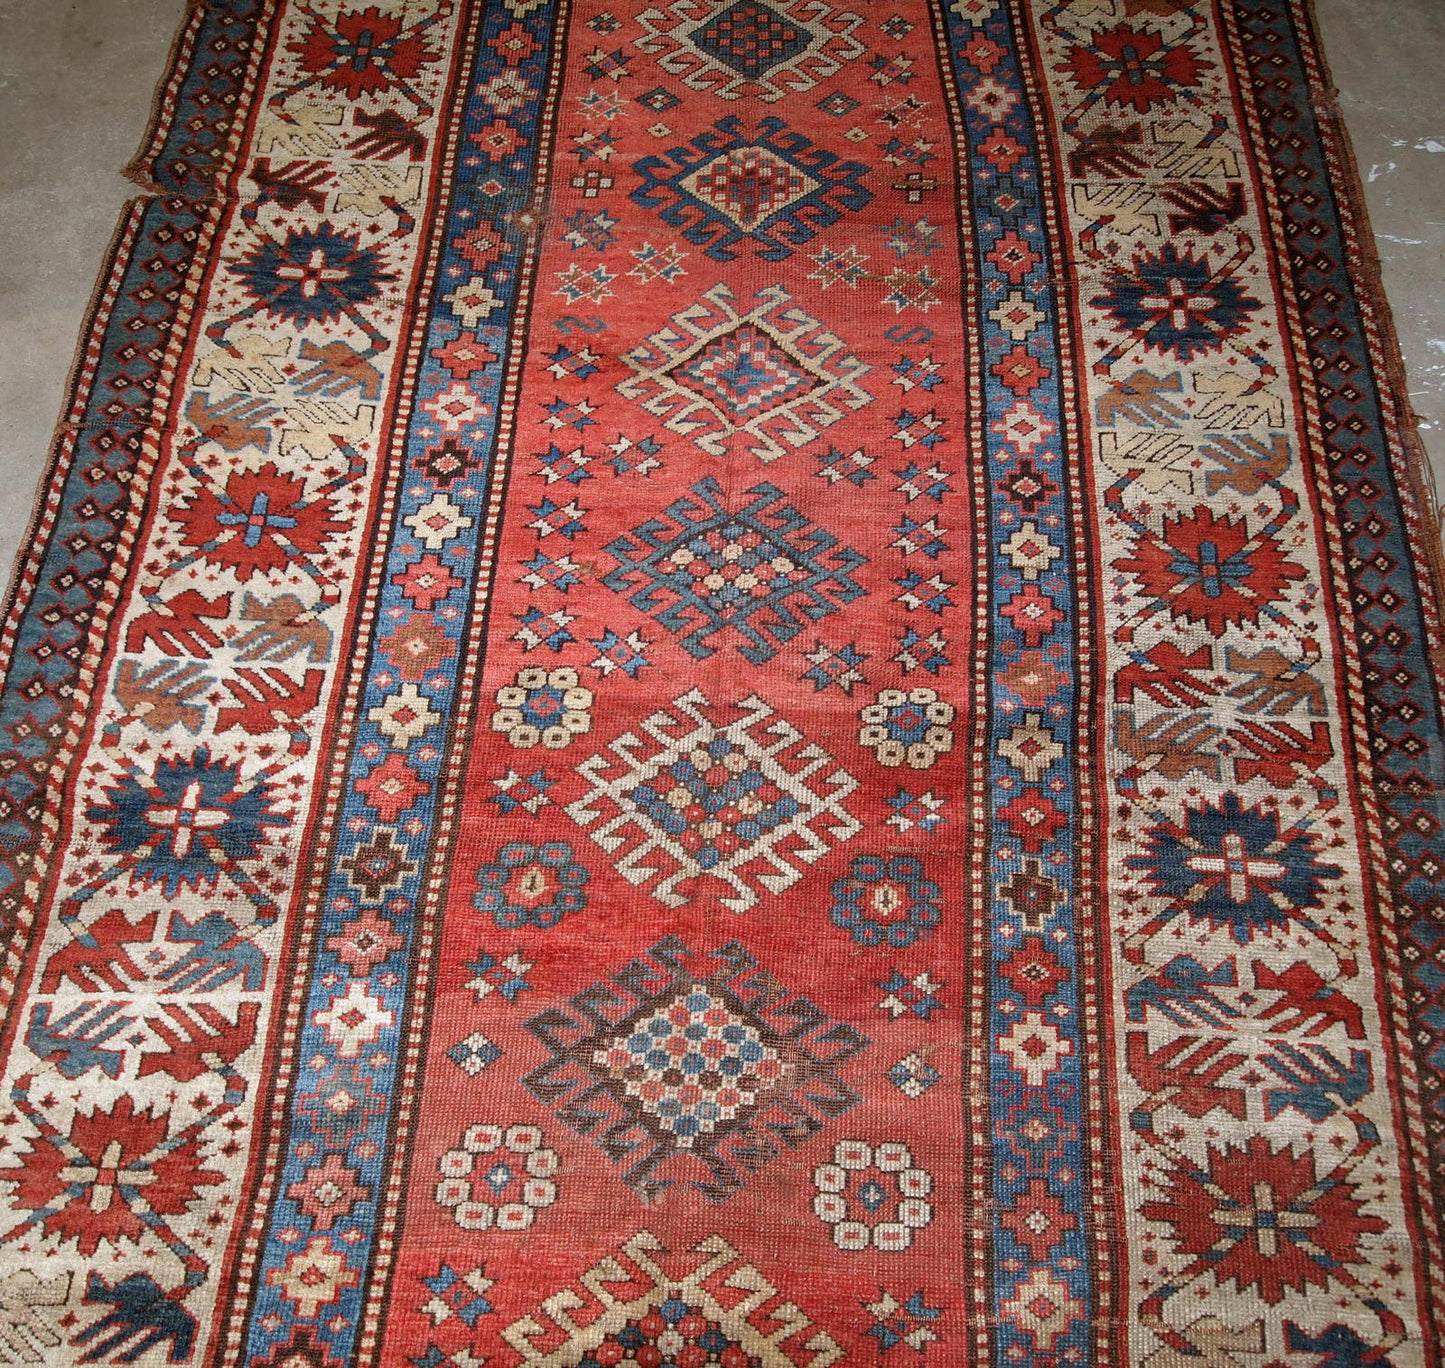 Handmade antique Caucasian Kazak rug in red and beige shades. The rug is from the end of 19th century in original condition, it has some low pile, a little cut on one side.